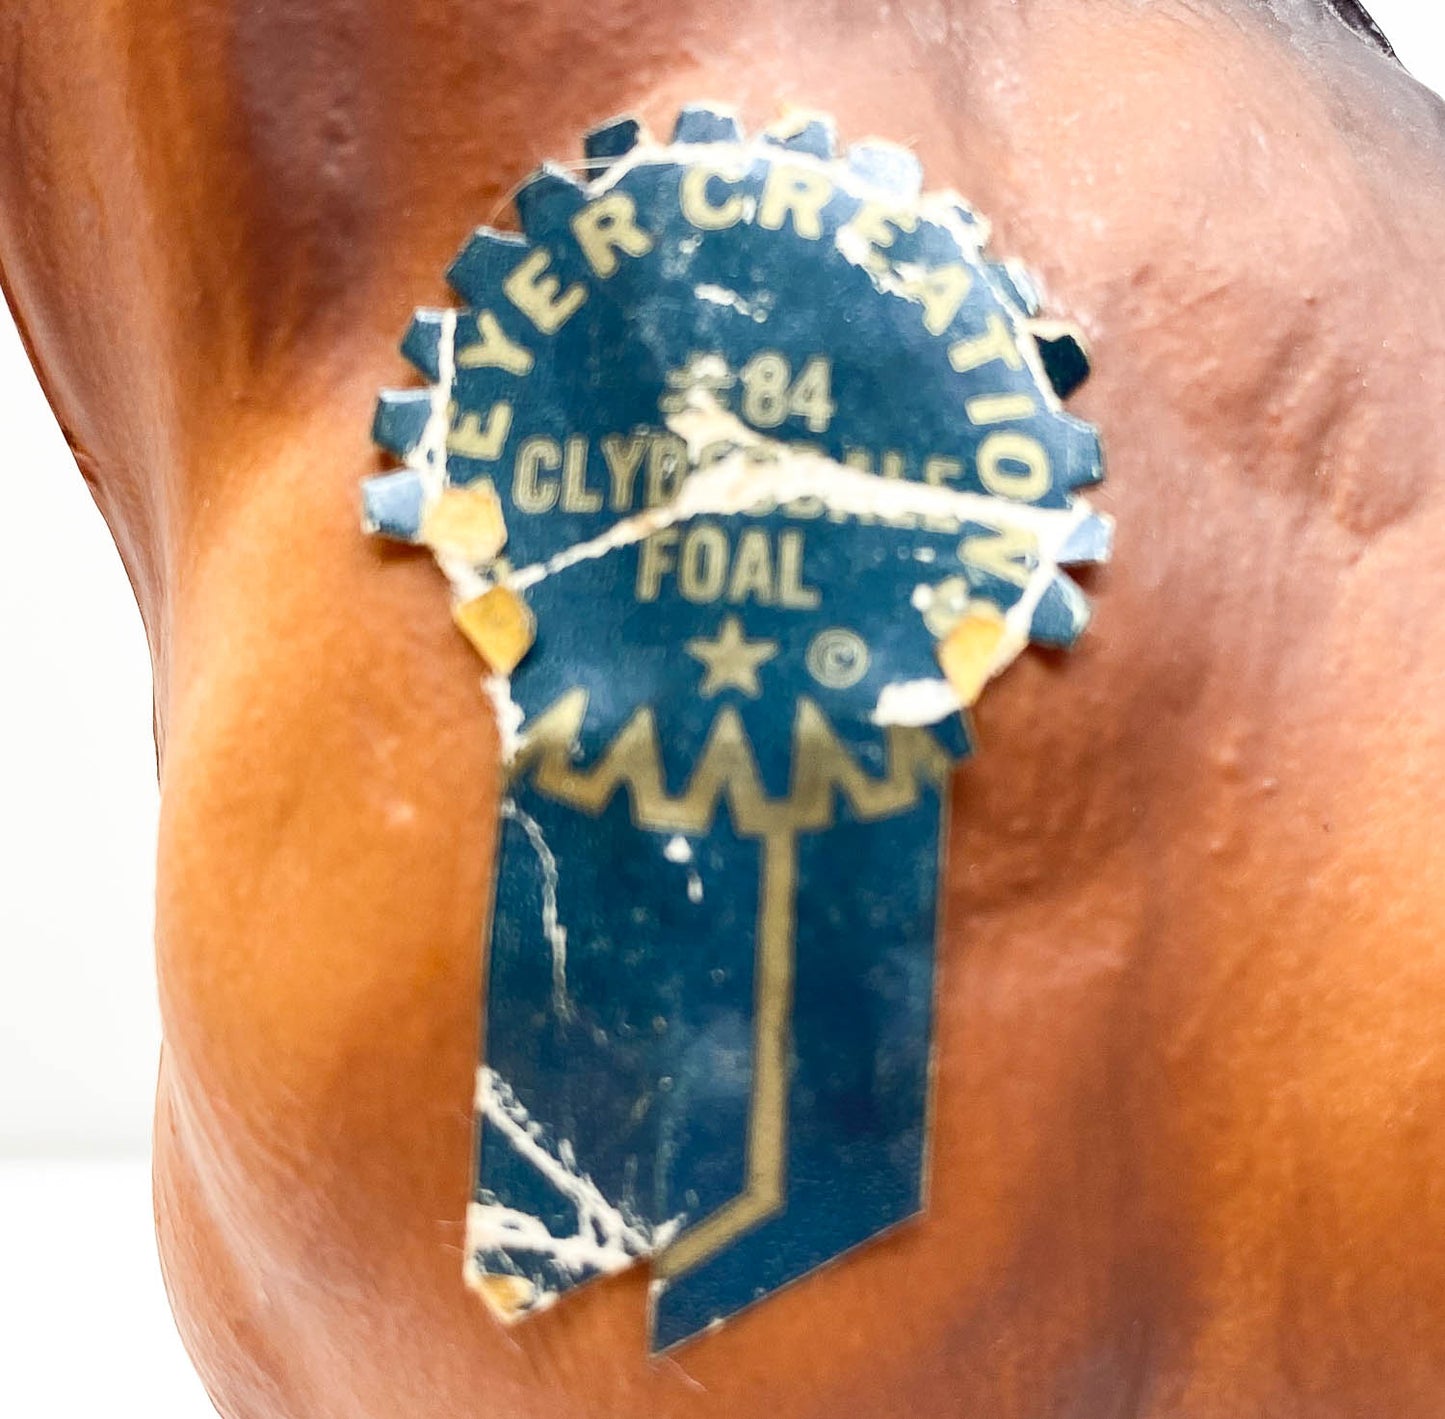 Clydesdale Foal, Chestnut w/ BLUE RIBBON Sticker